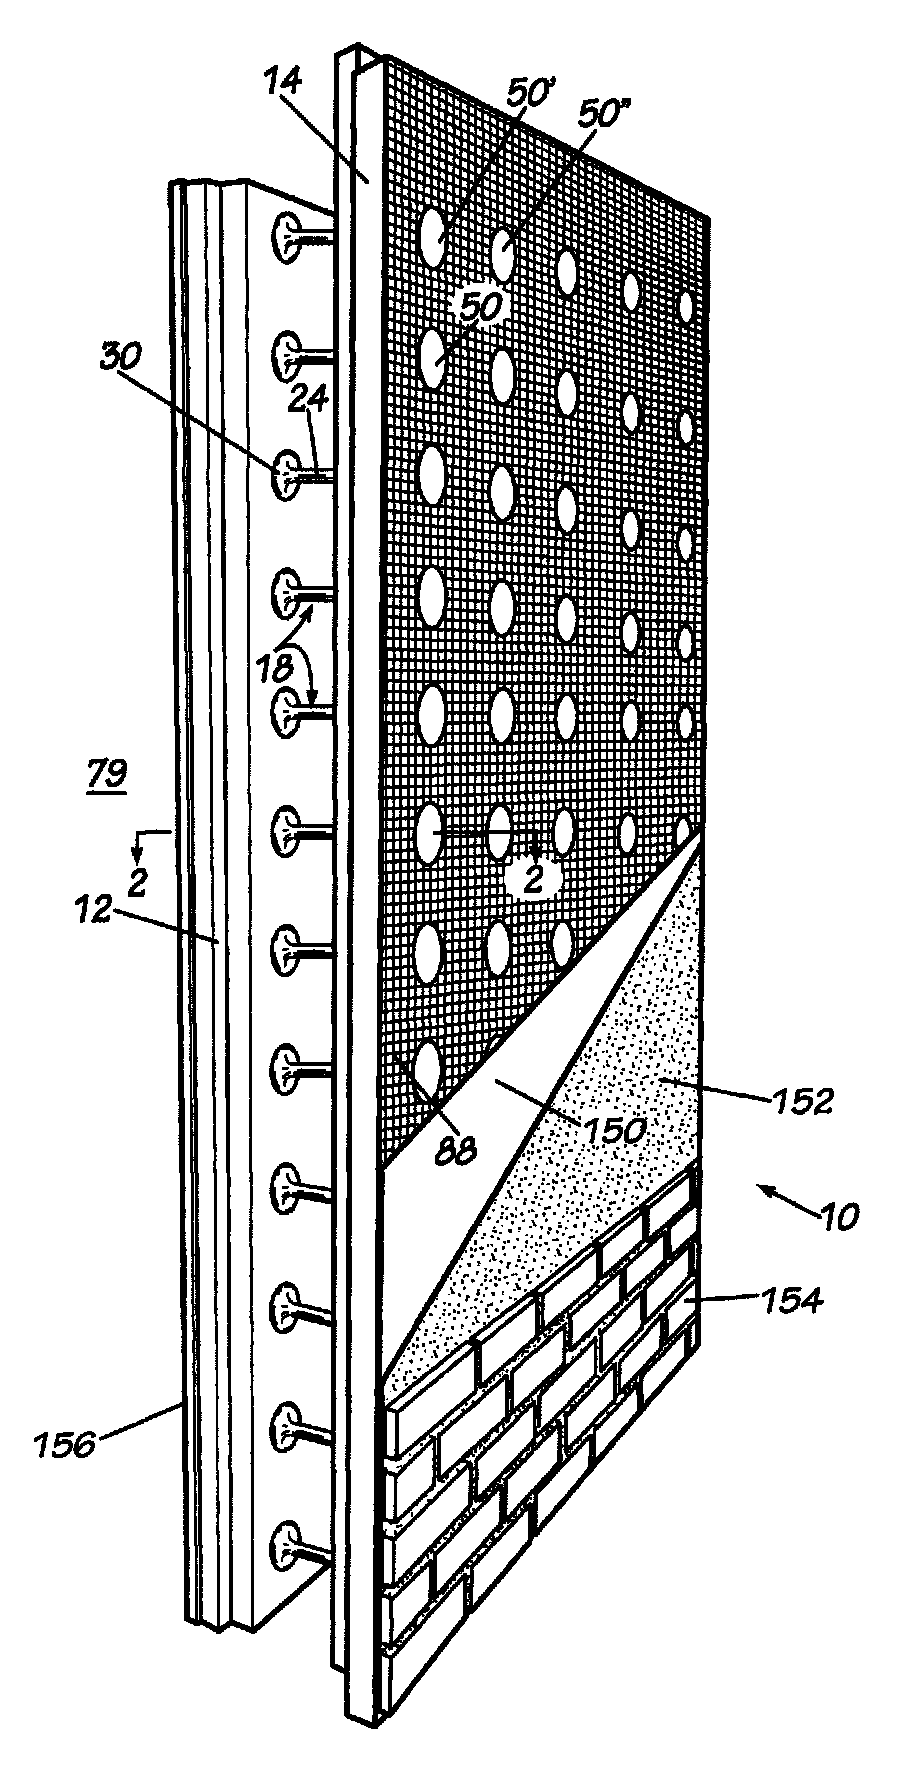 Reinforced insulated concrete form